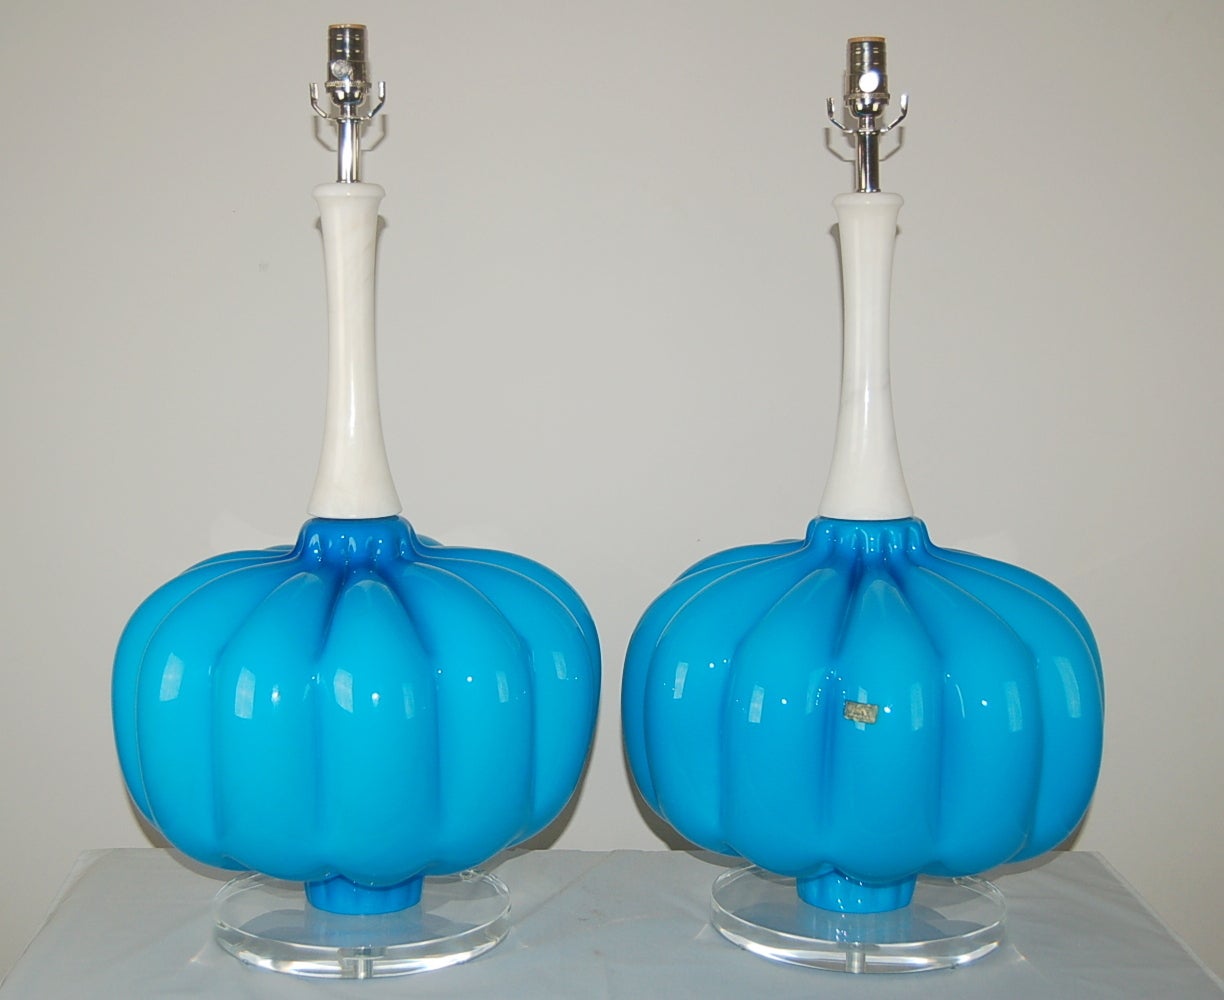 Matched pair of huge vintage Murano table lamps. A perfect example of over-the-top fifties Italian style mounted on huge Lucite platters. The CERULEAN BLUE 'Pomodoro' bodies are topped with their original turned Italian alabaster necks. 

They stand